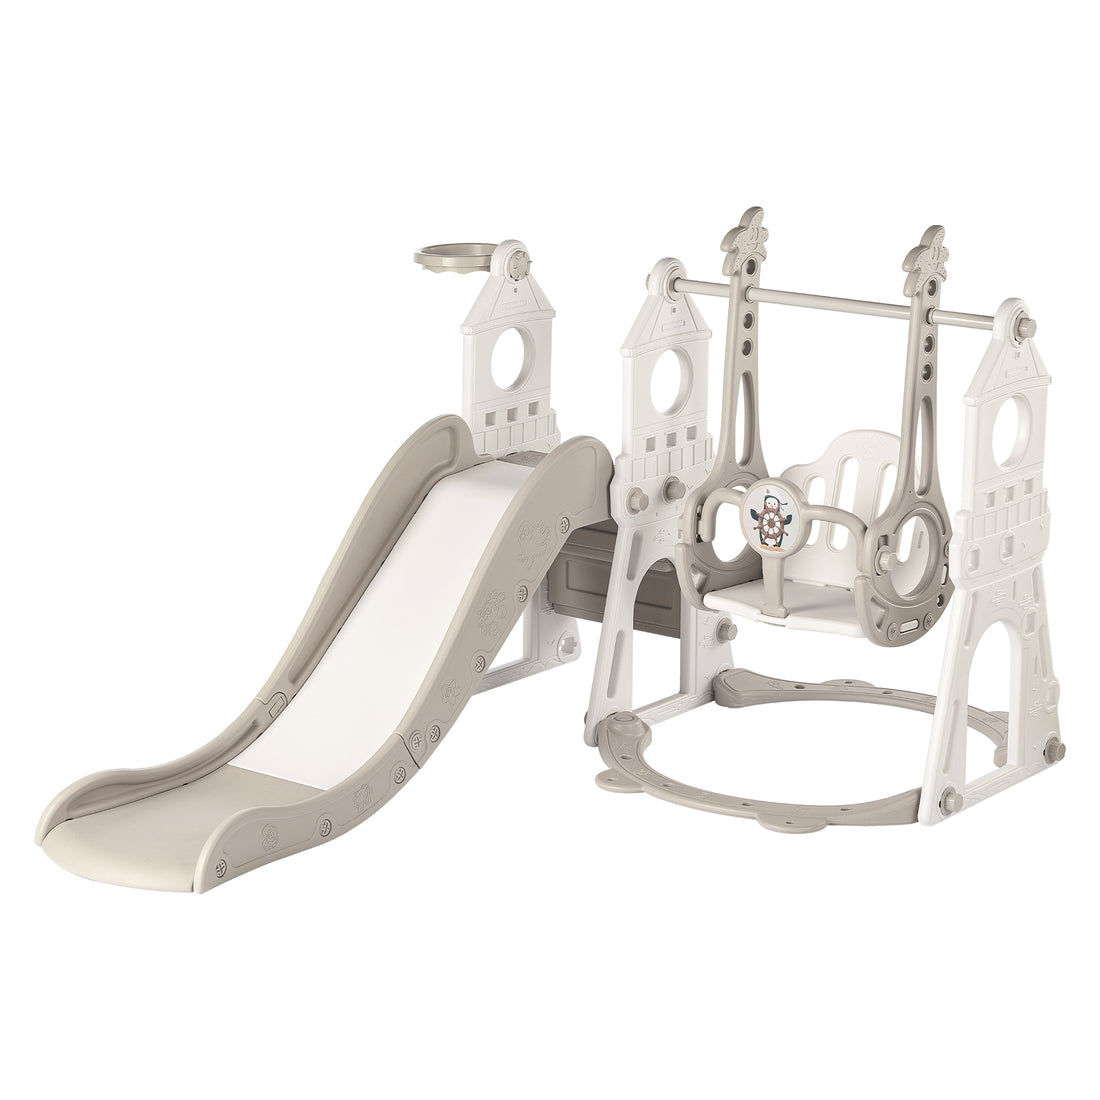 Duke Baby 4 in1 Swing and Slide Playset with Basketball Hoop - White